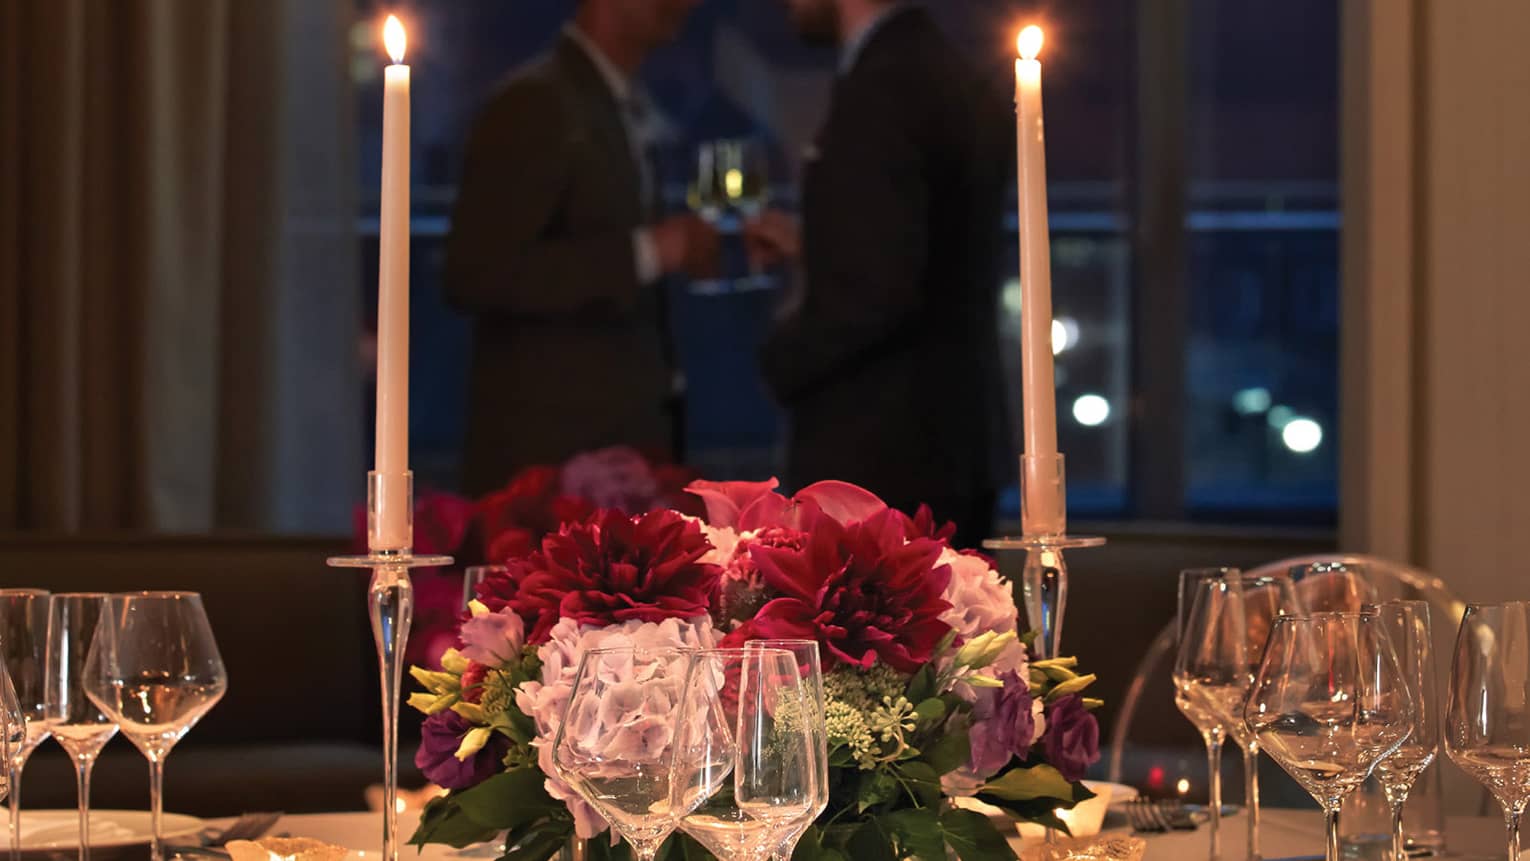 Two tall glowing candles and floral arrangement, glassware on dining table